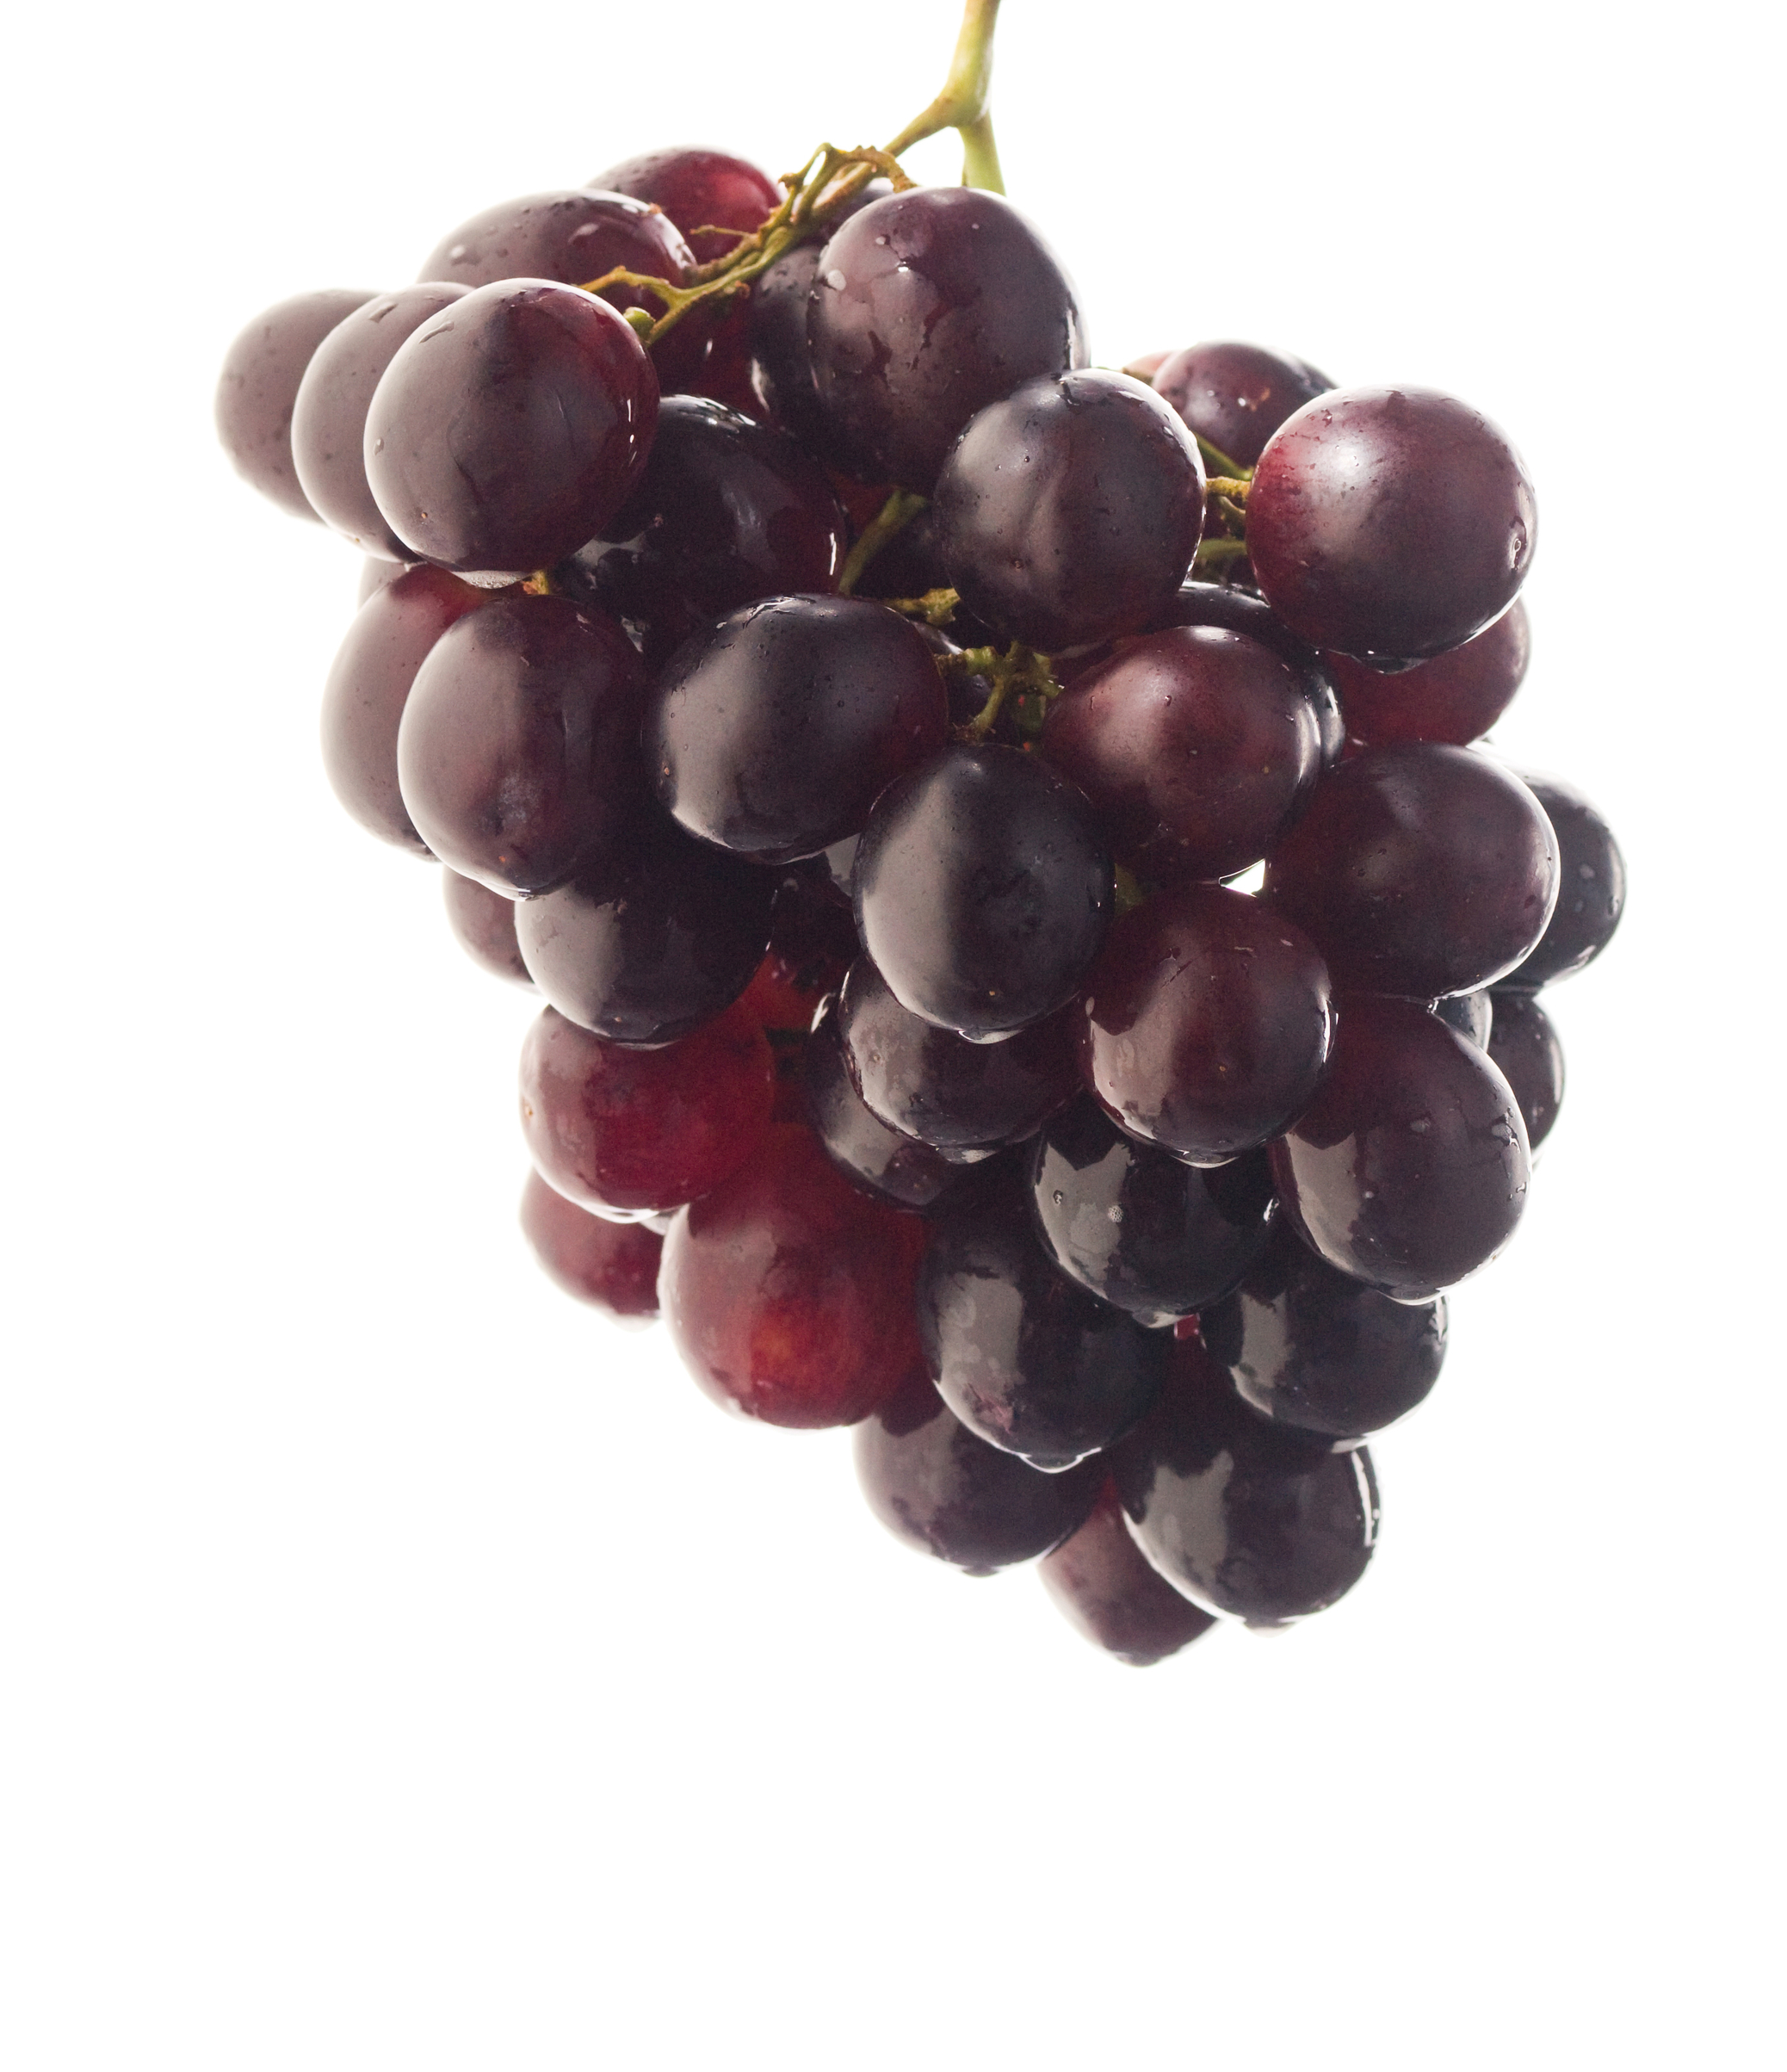 An image of muscadine grapes.